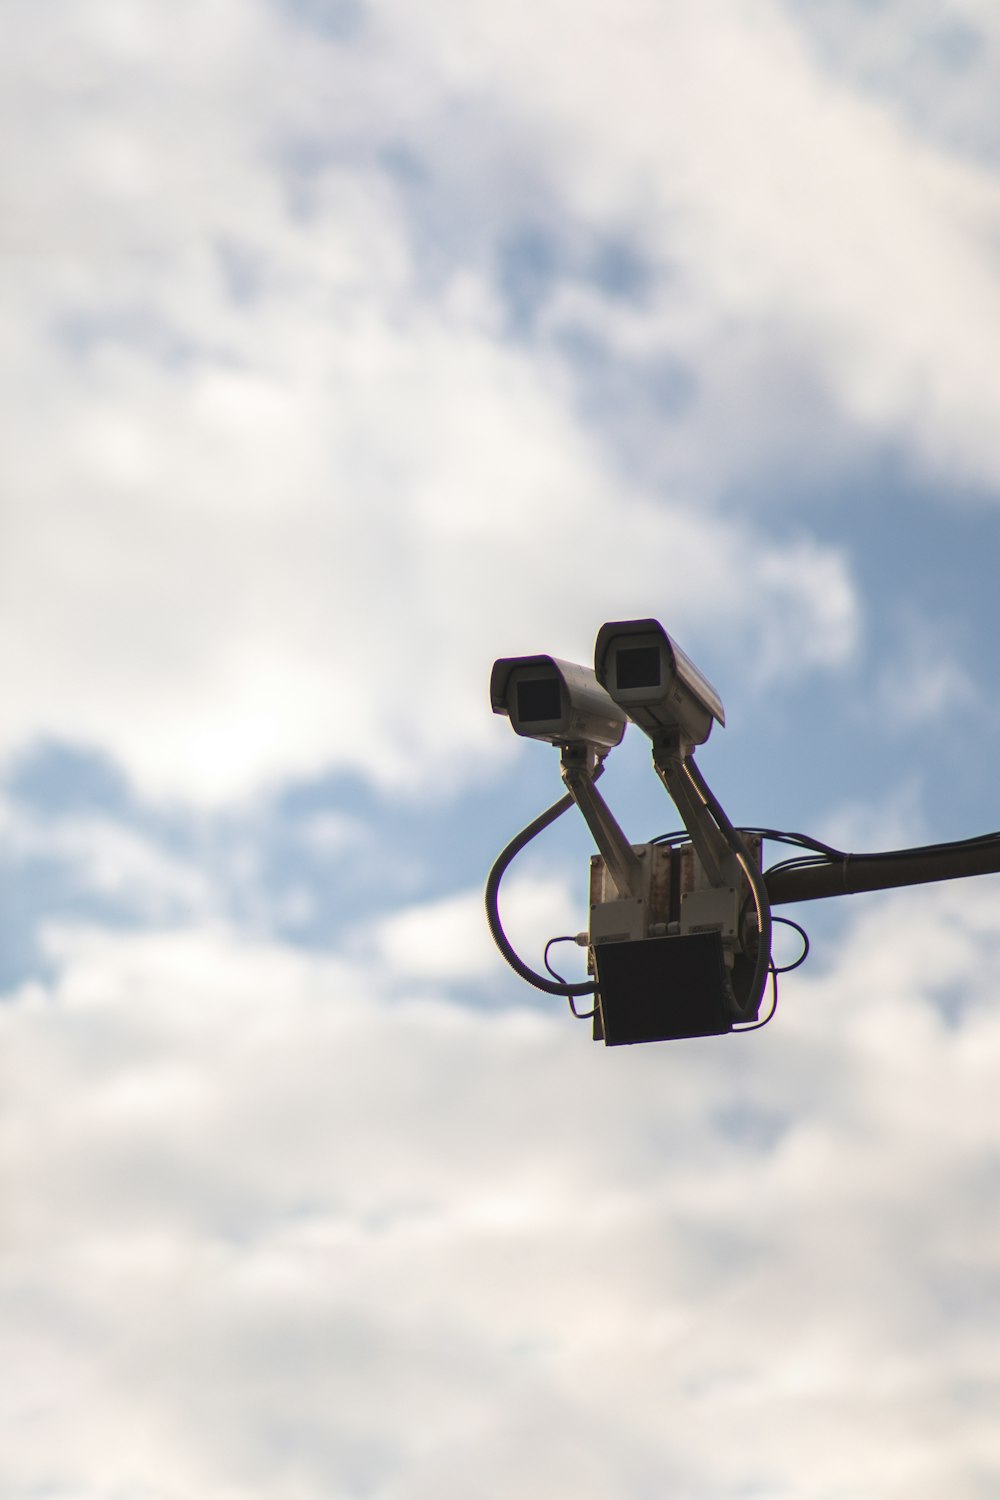 a camera attached to a pole in front of a cloudy sky